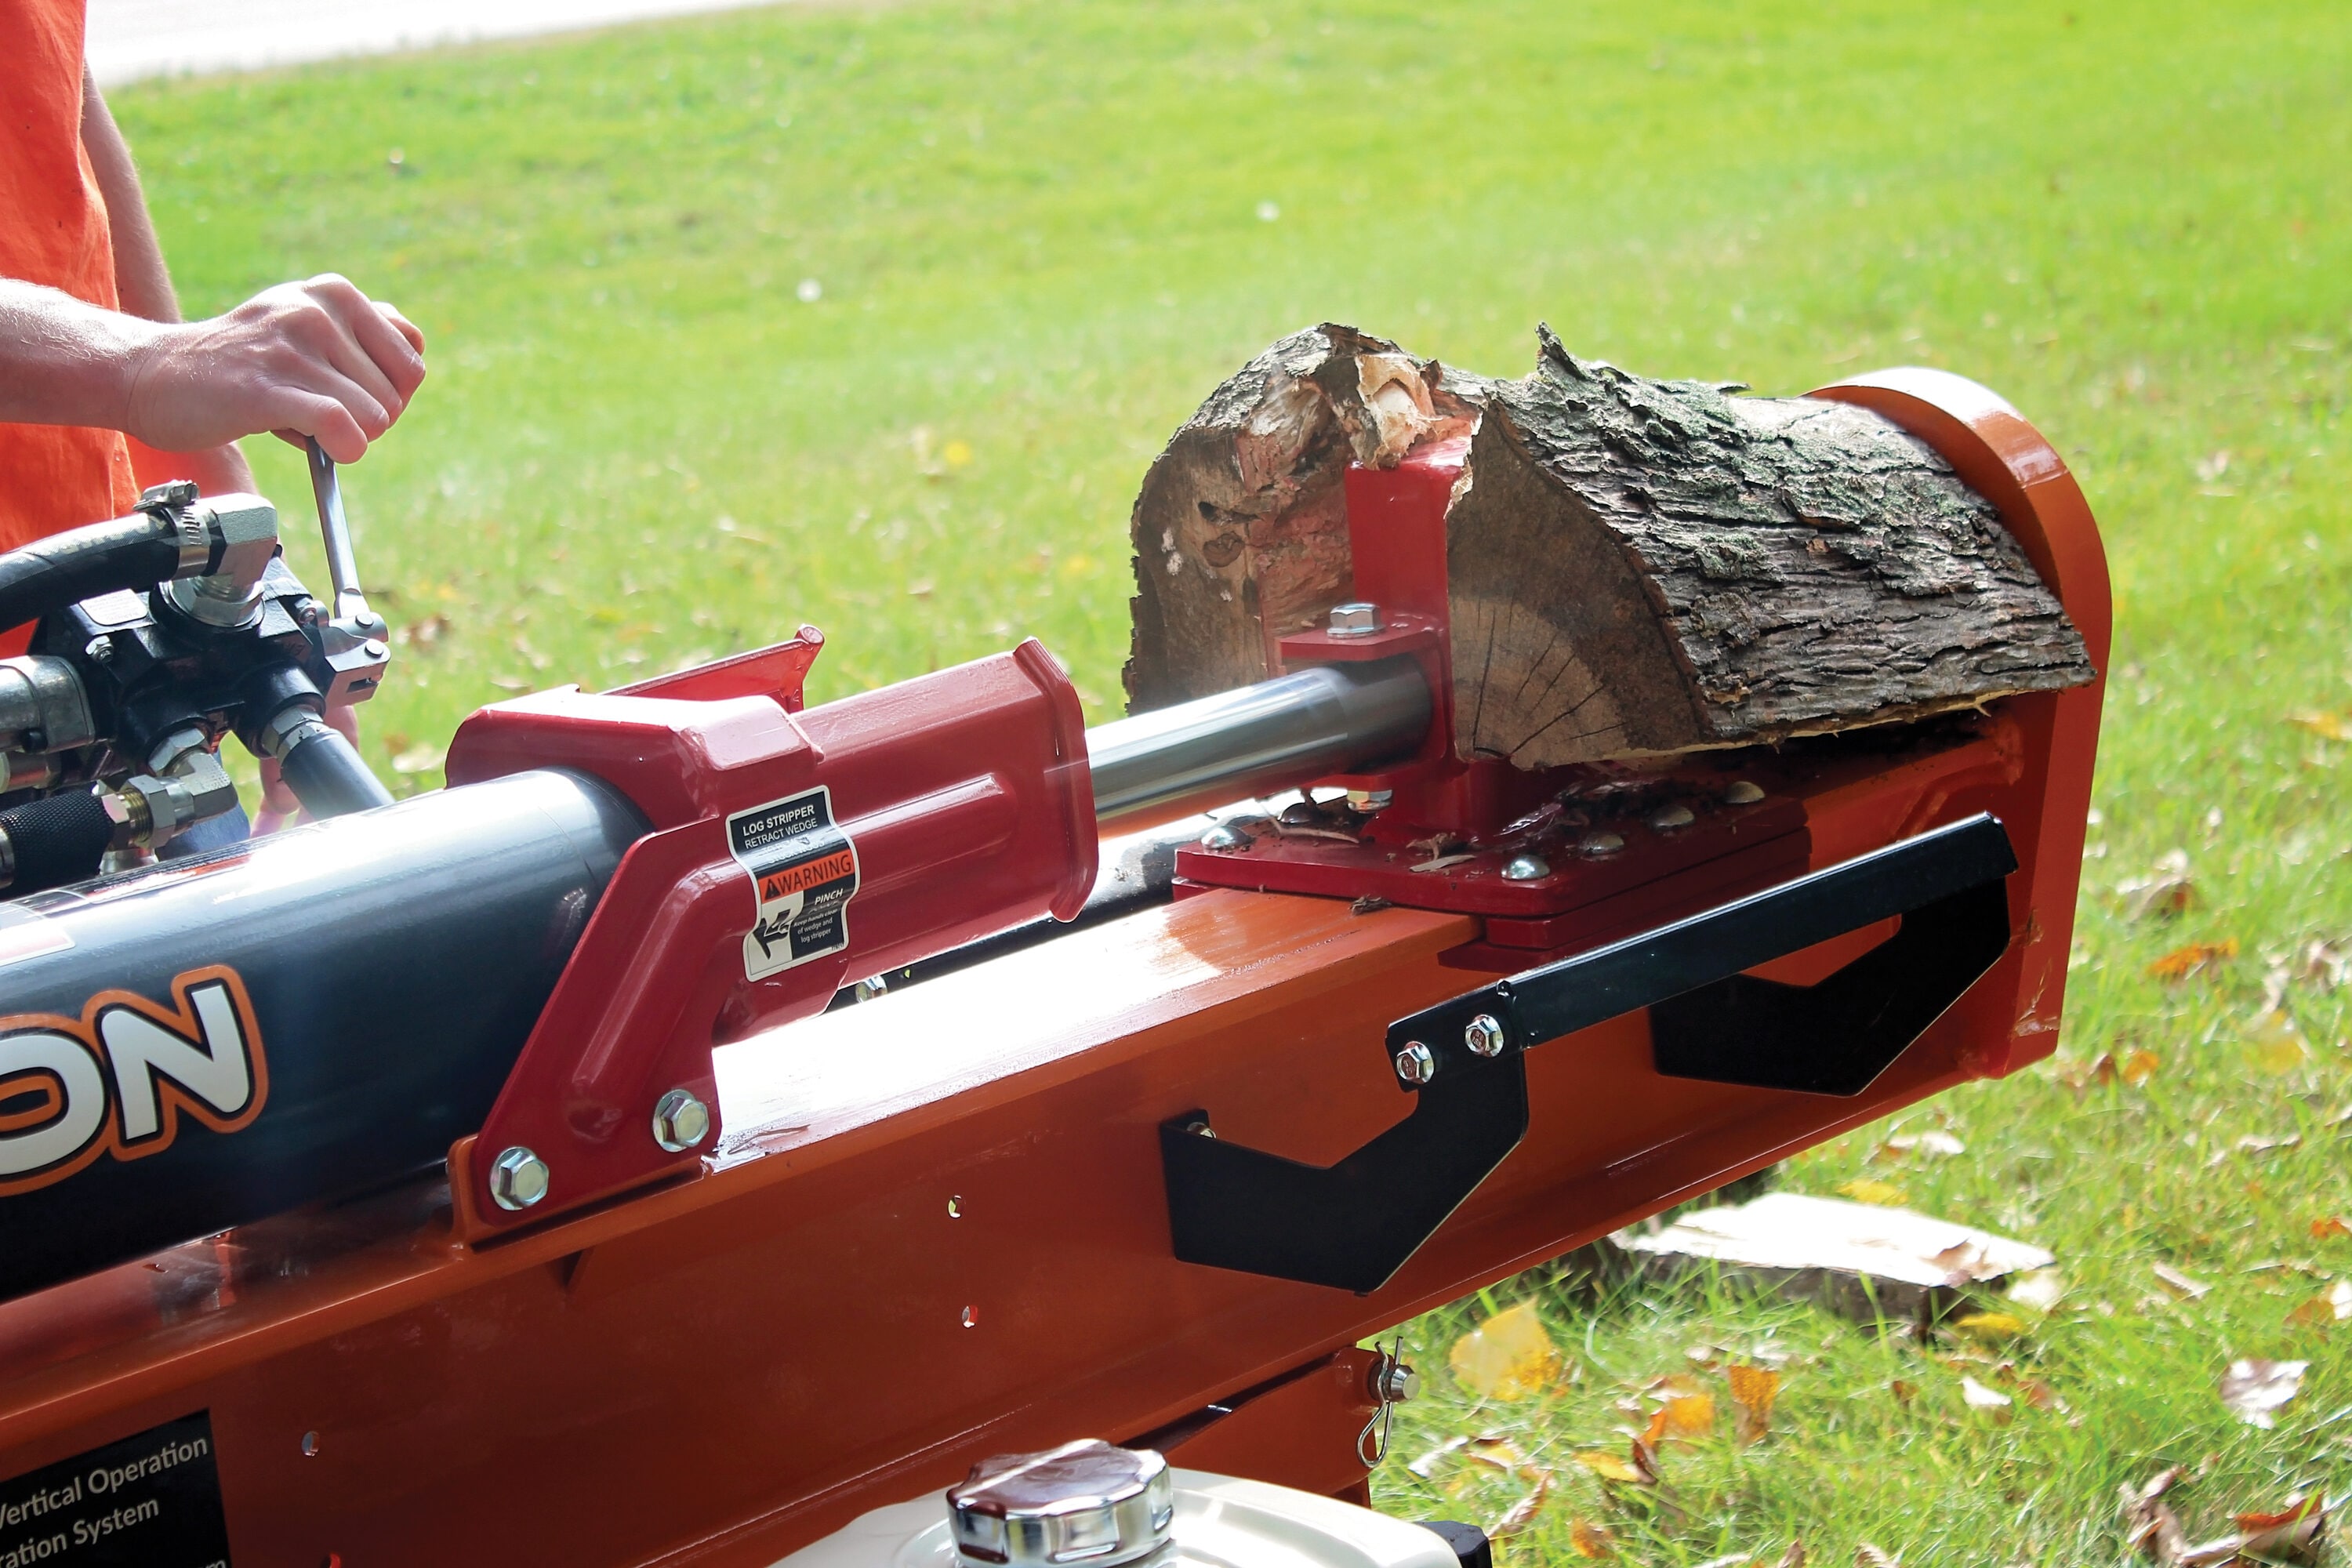 Boss Industrial 27-Ton 208-cc Horizontal and Vertical Gas Log Splitter with  Briggs and Stratton Engine in the Hydraulic Gas Log Splitters department at